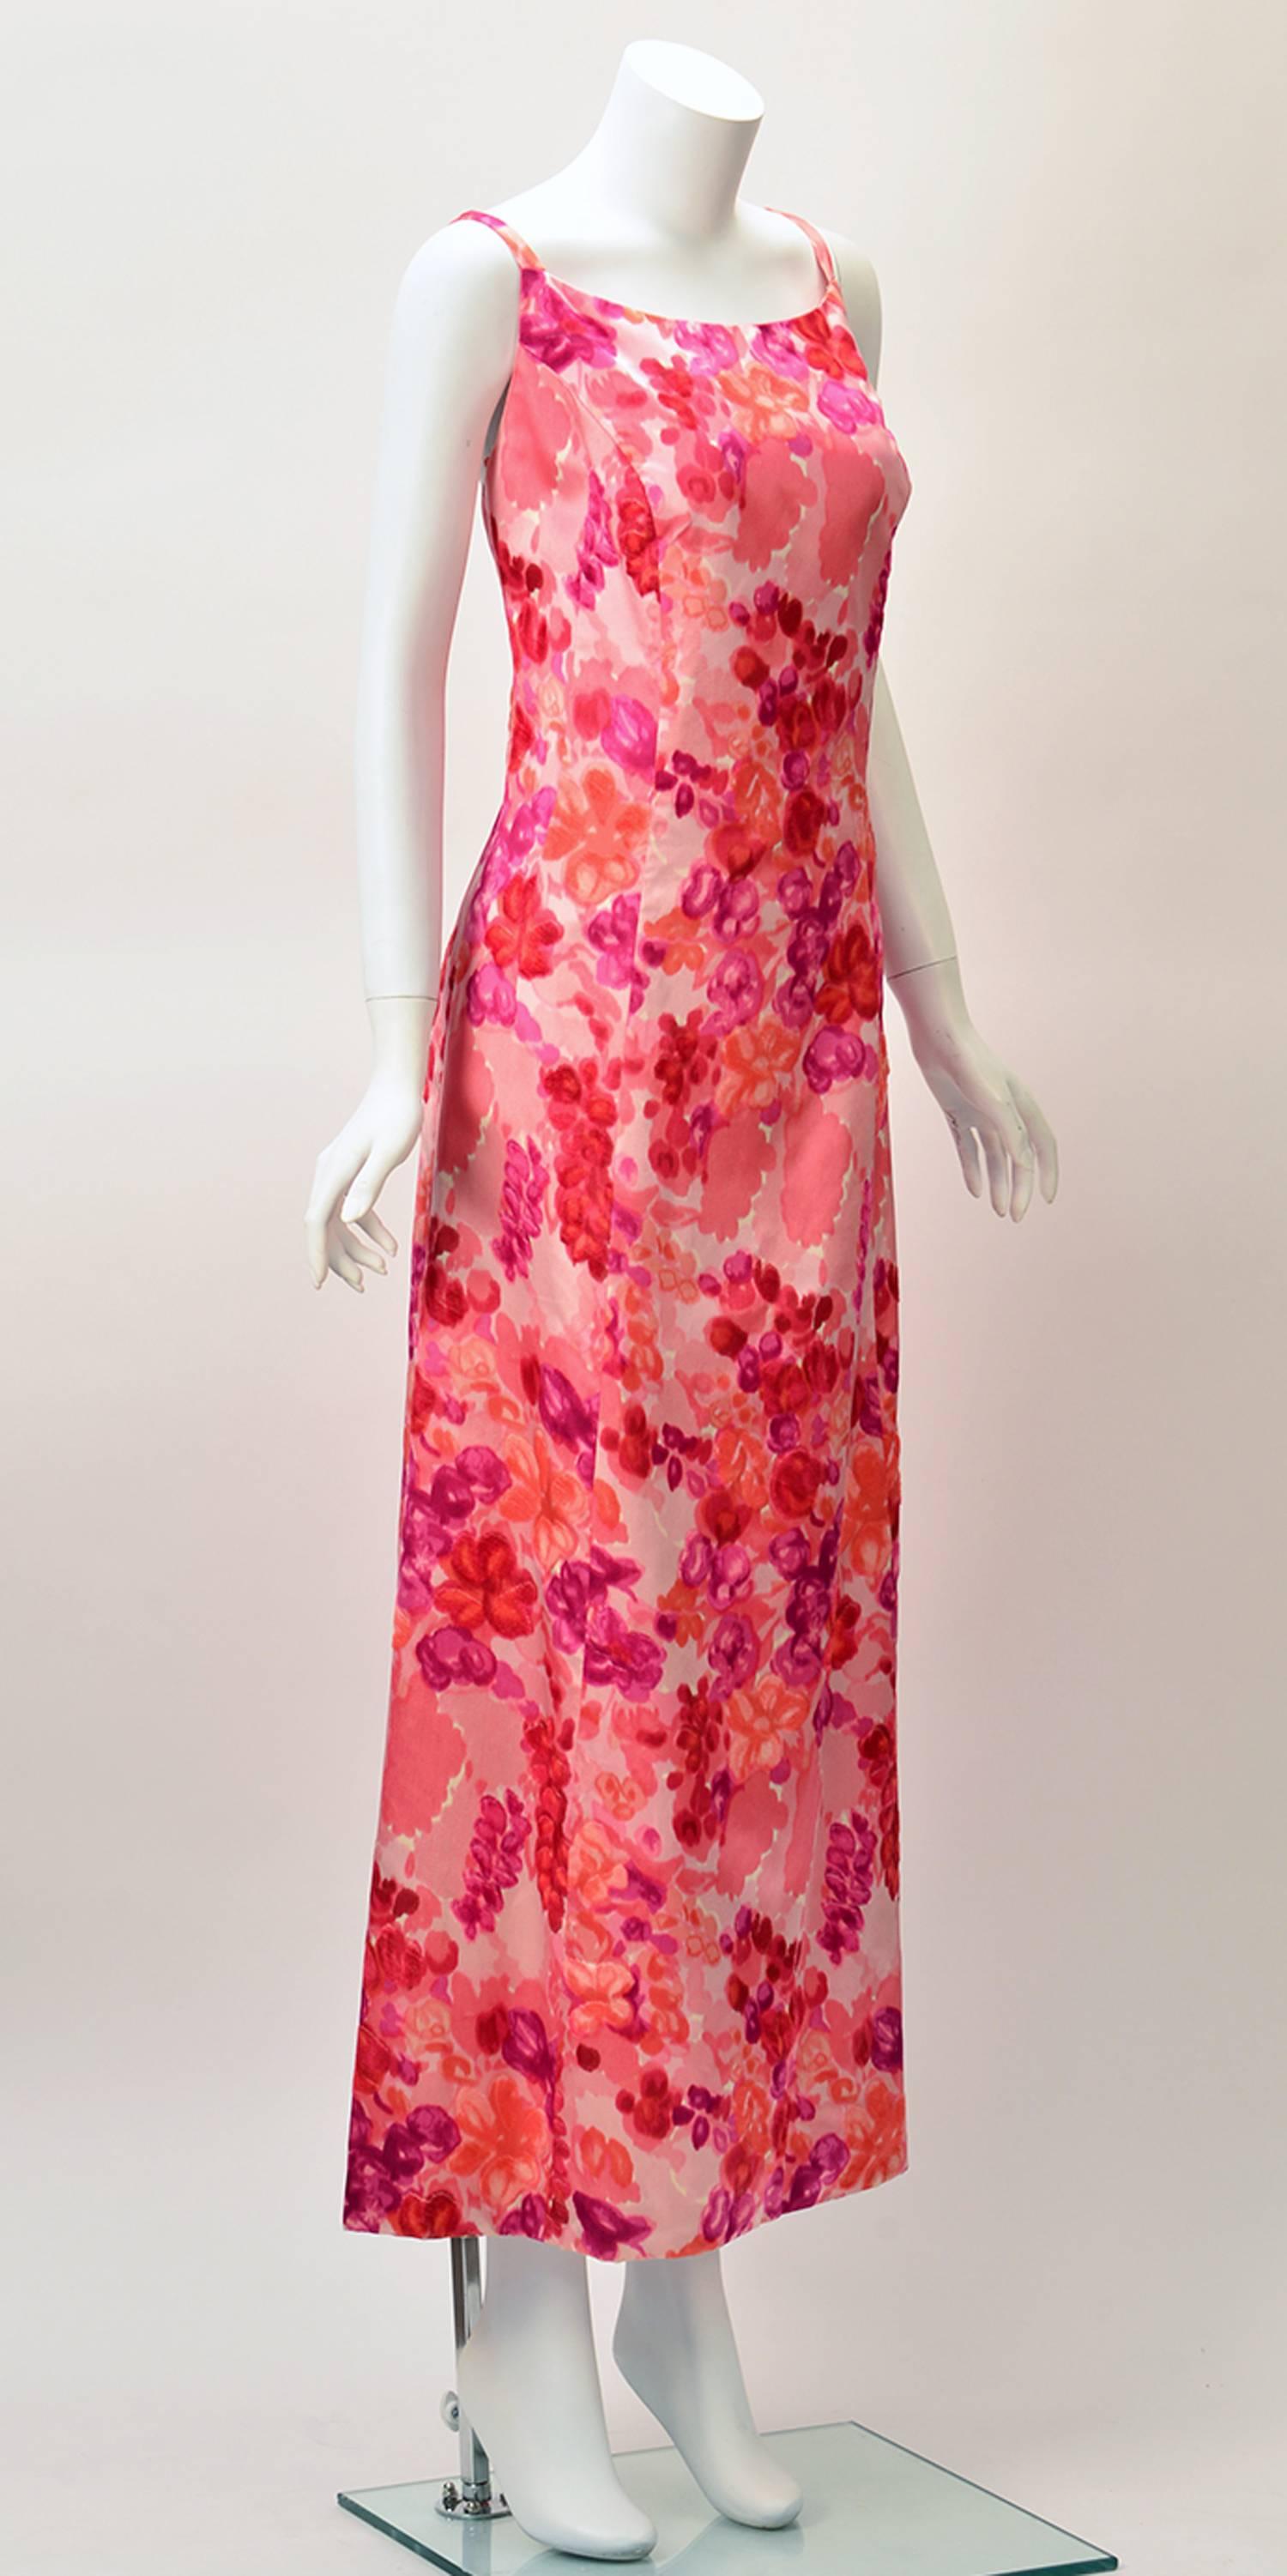 
Perfect for spring and summer comes this 1964 silk satin salmon pink evening gown with velvet flowers.  The floral motifs are velvet in berry colors.  Square neckline with an open back. Dress features princess seams. Zipper center back. 
 
Modern